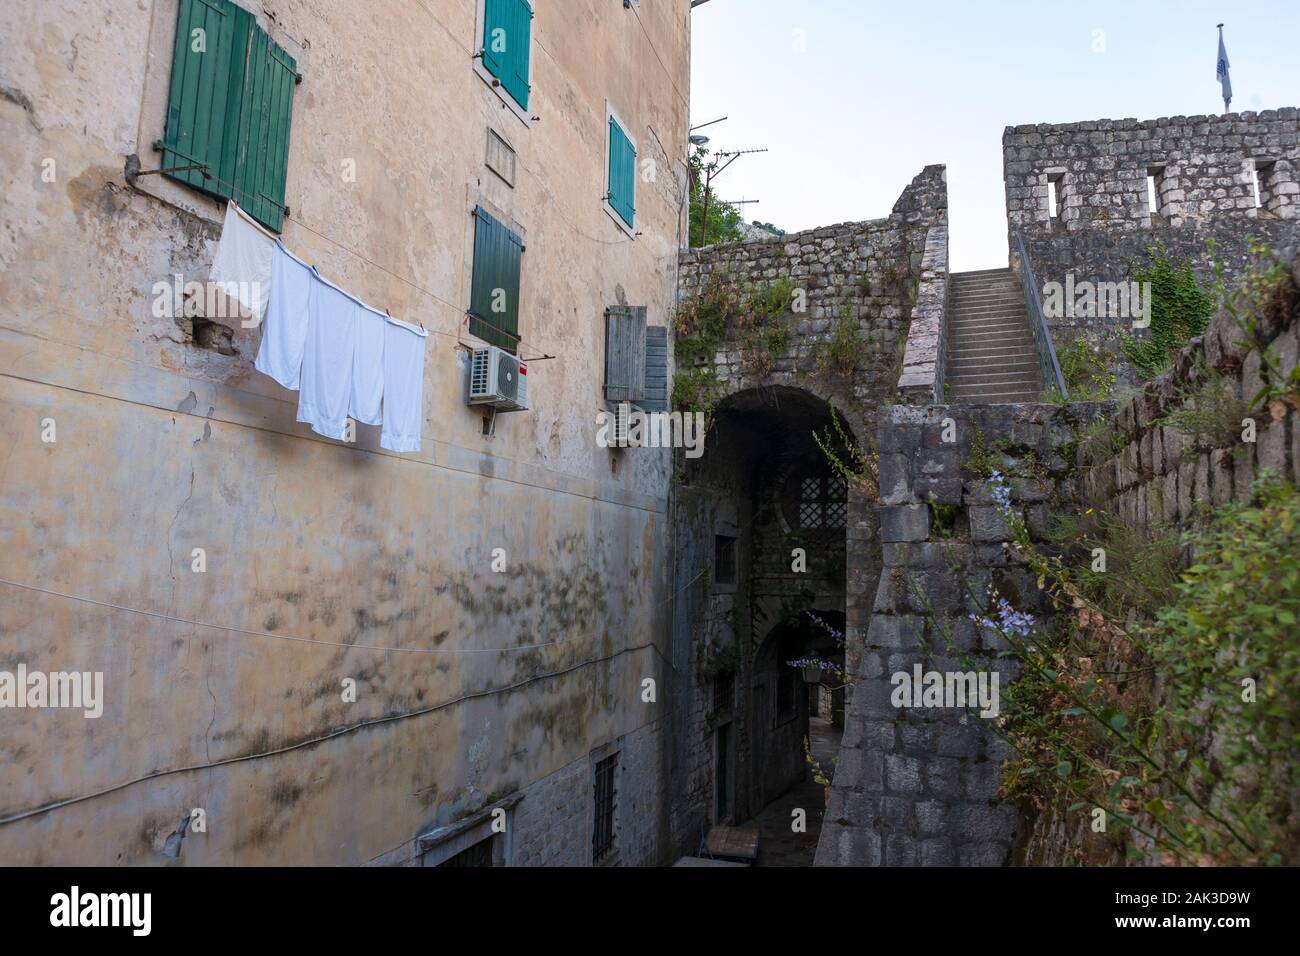 The Gurdic Gate (South Gate) from inside the Old Town, Kotor, Montenegro Stock Photo